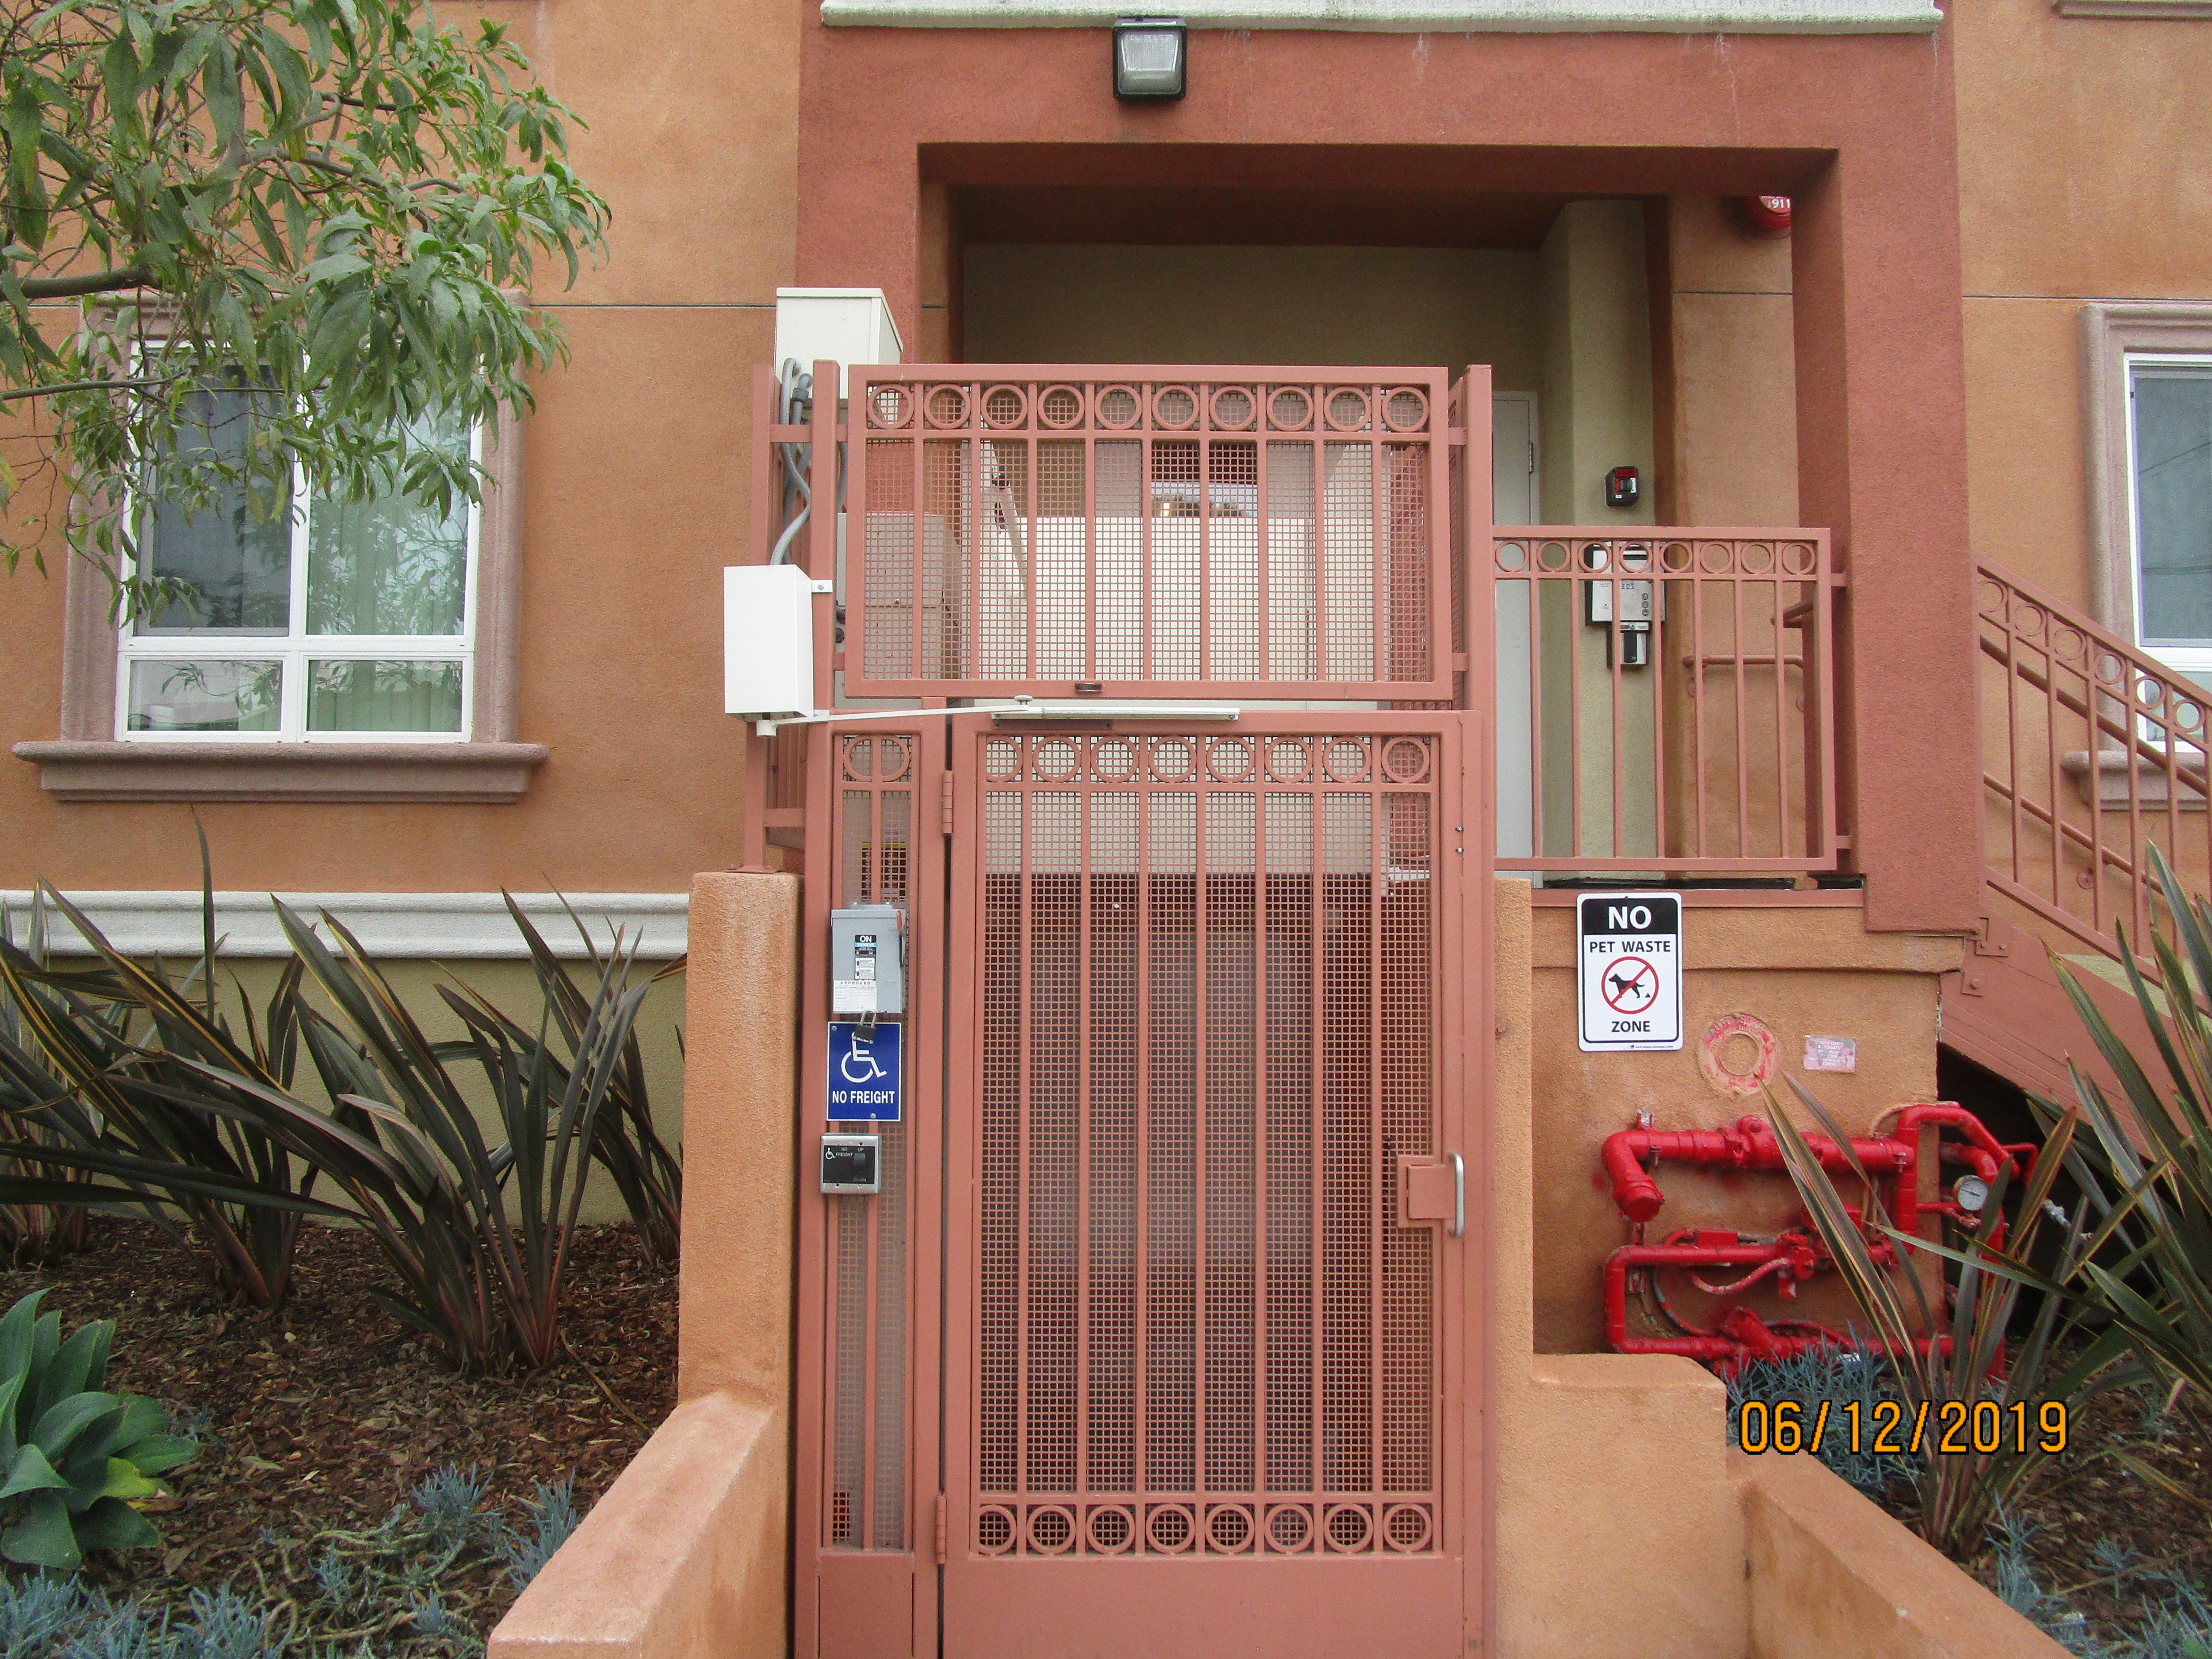 Full front view of a brick color metal locked door, call box and a No Handicap Freight sign on the left side of the door, No pet waste sign on the right side of the door, planters on both side, red water meter on the right.